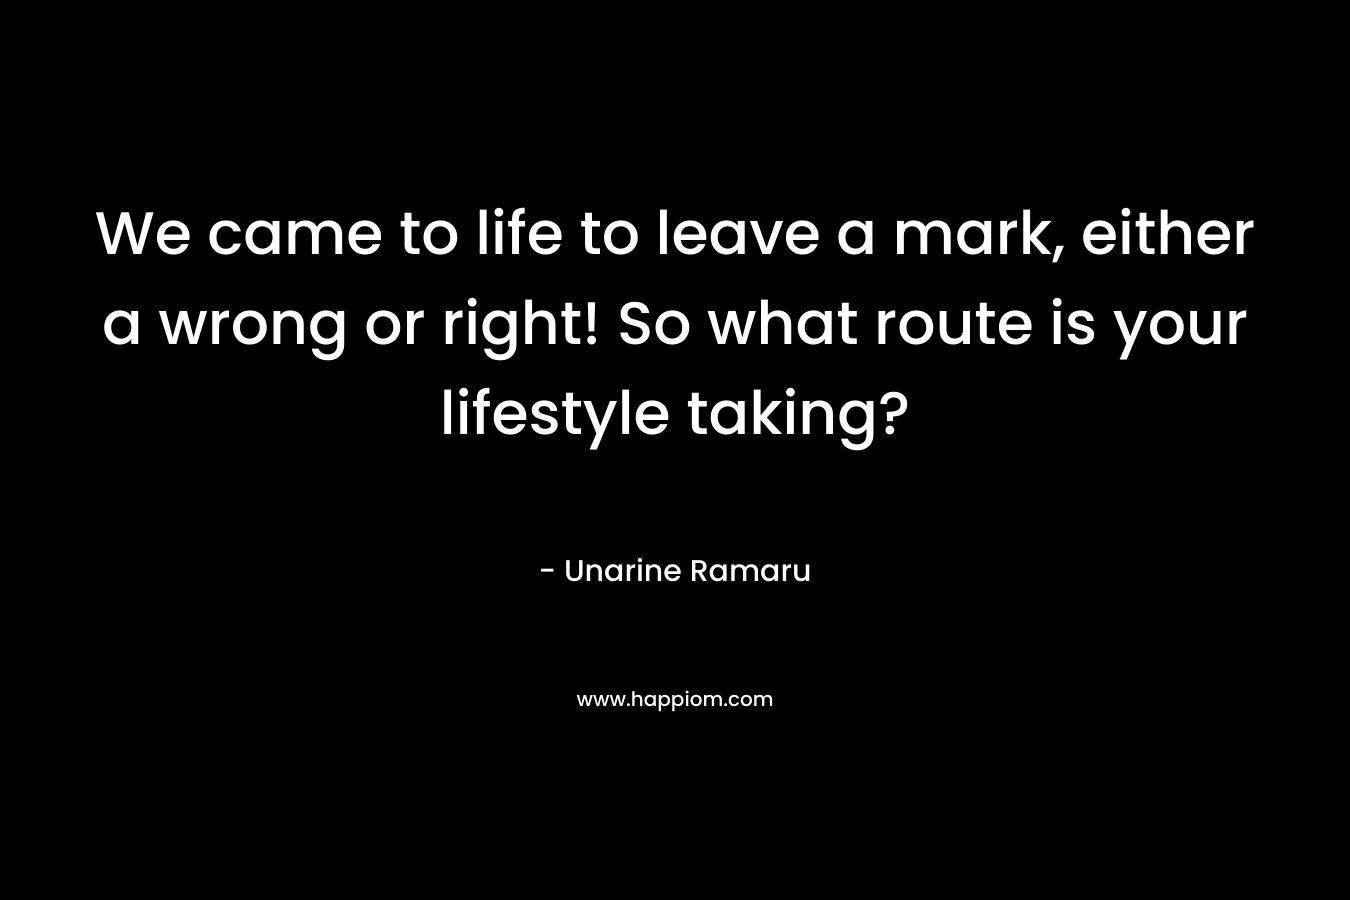 We came to life to leave a mark, either a wrong or right! So what route is your lifestyle taking?